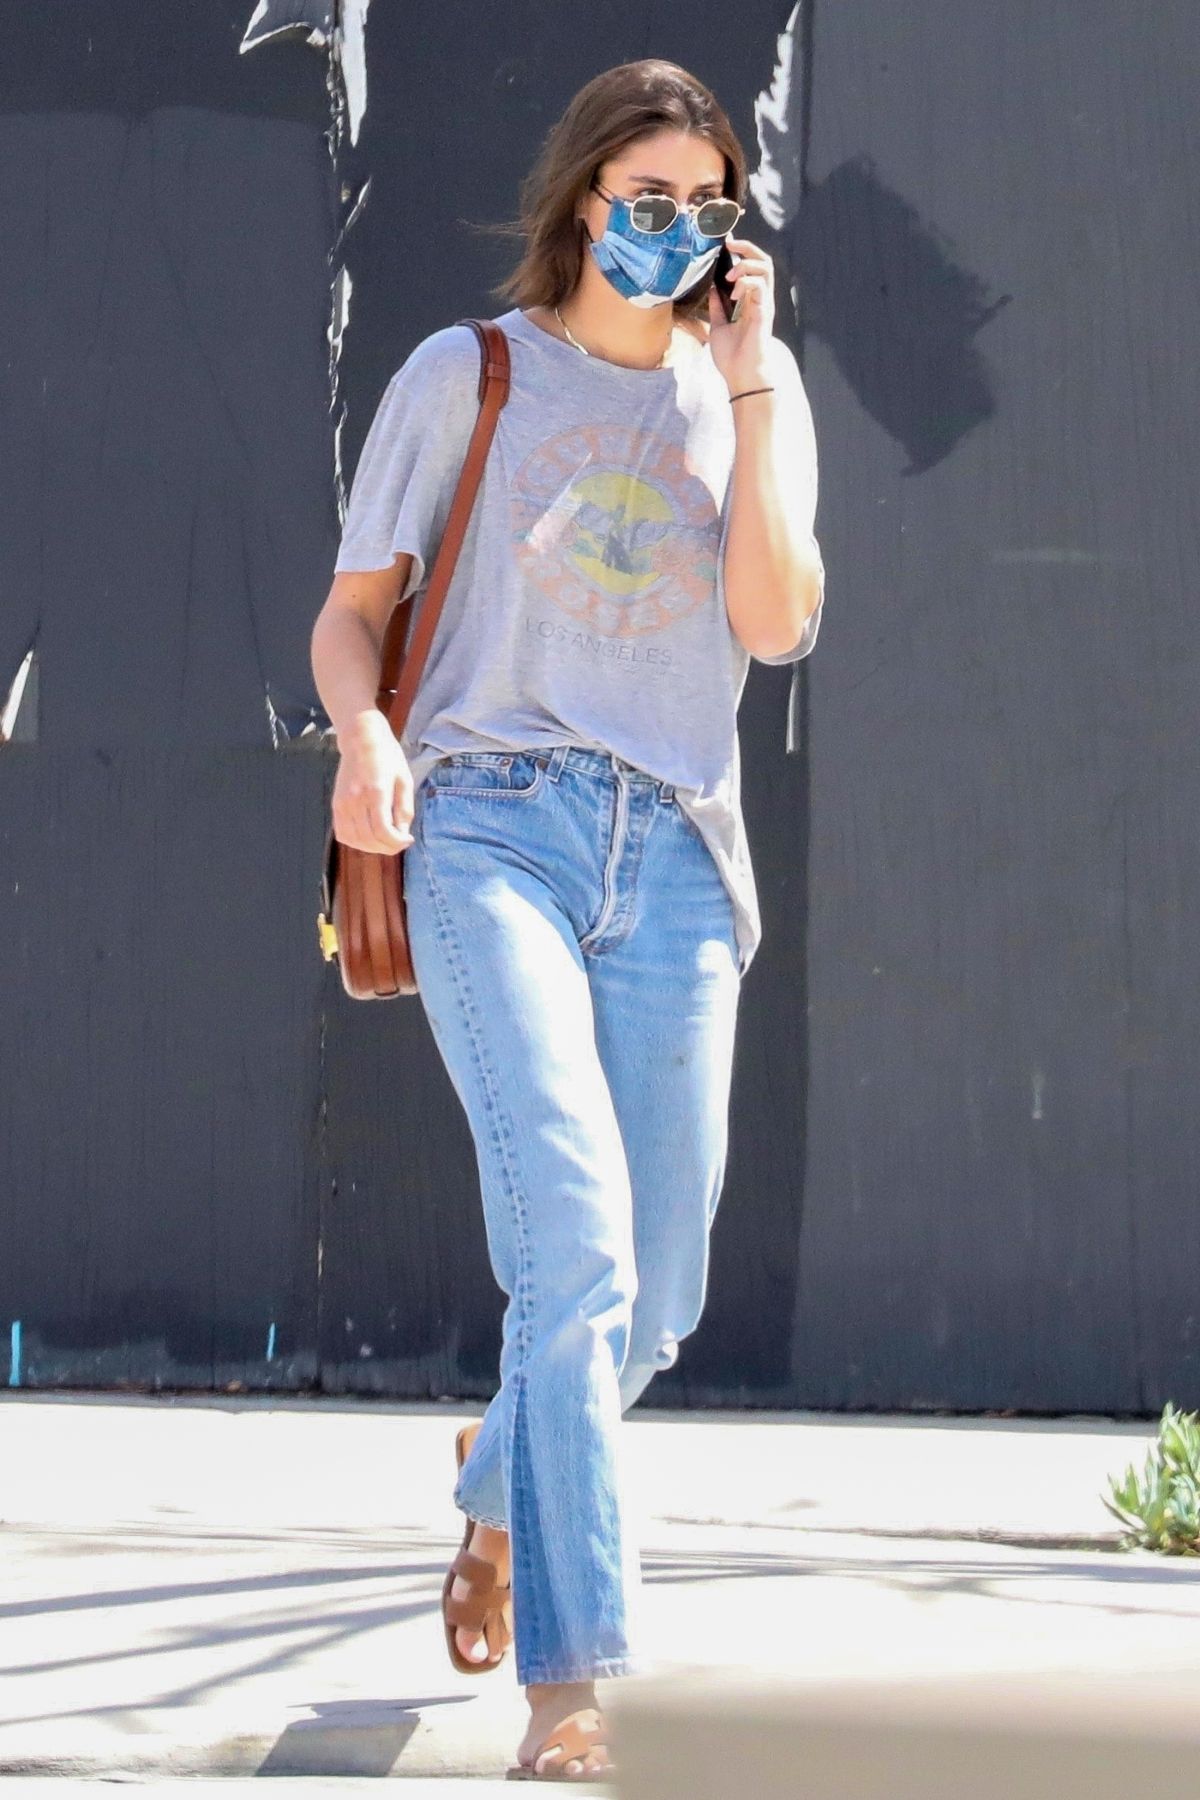 taylor-hill-out-and-about-in-los-angeles-03-24-2021-2.jpg